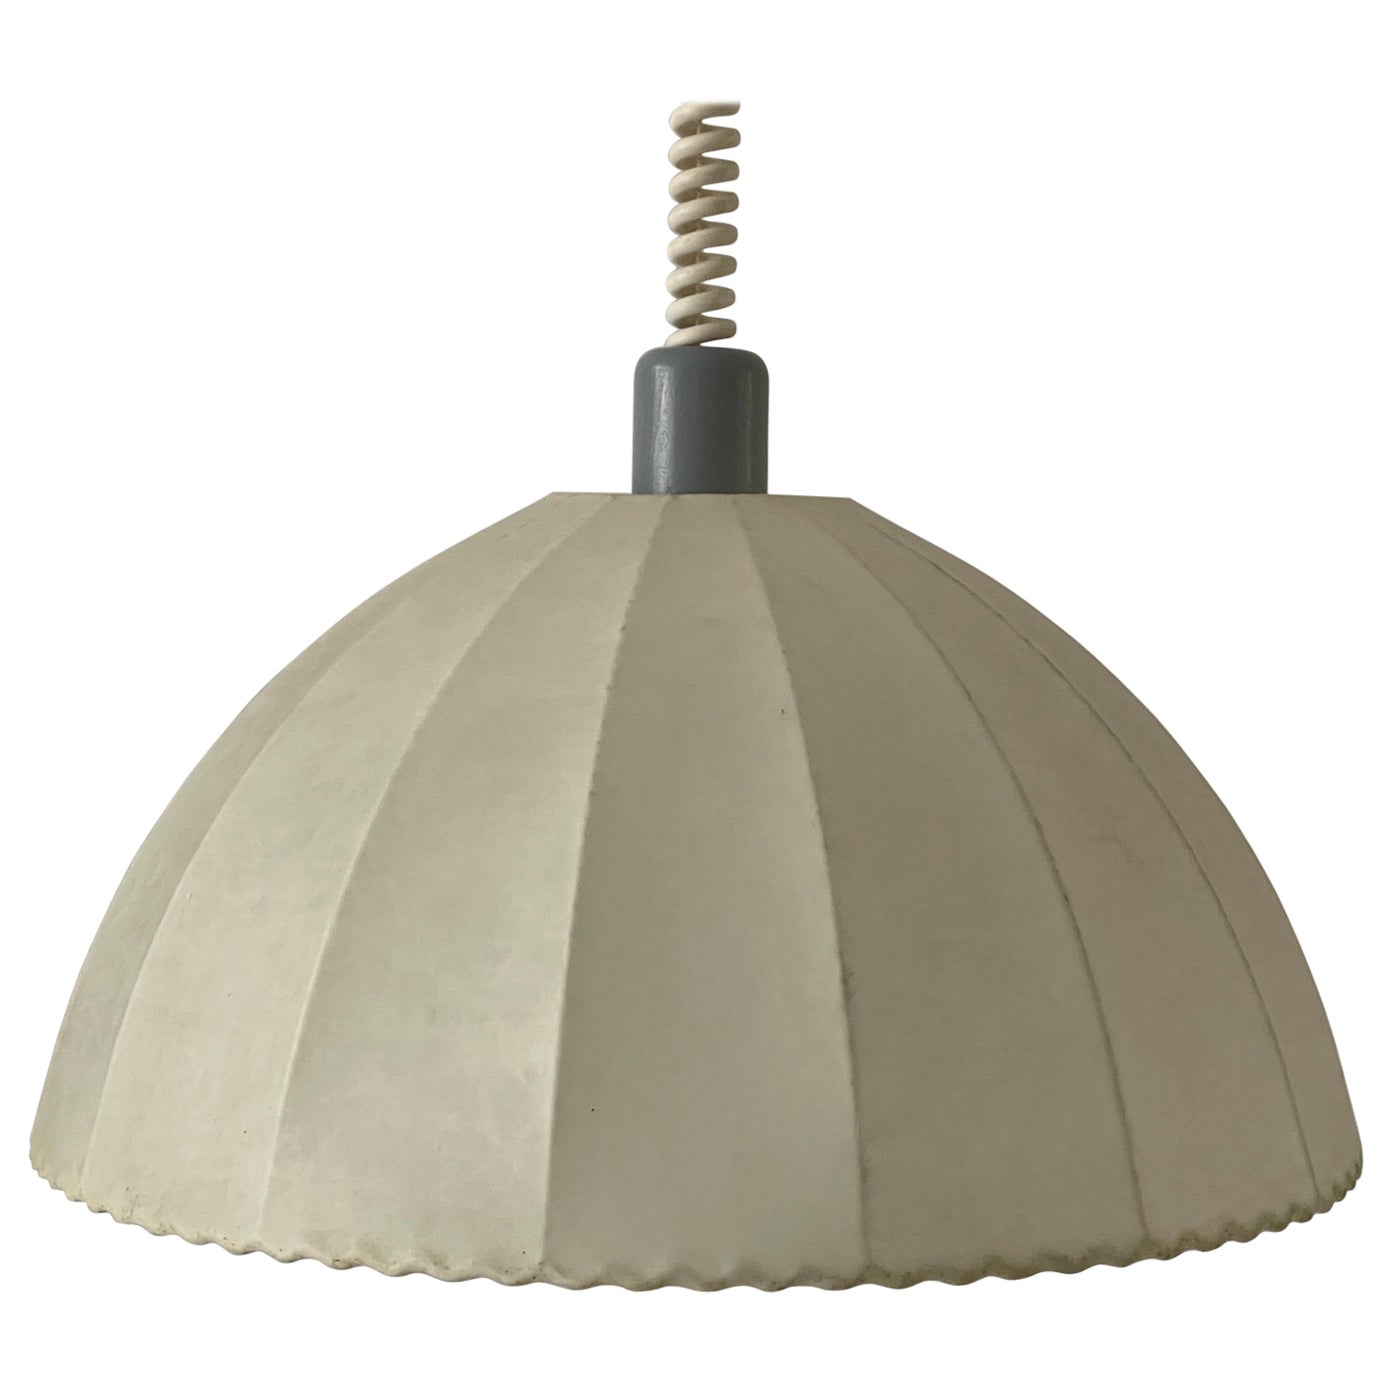 Cocoon Pendant Lamp by Goldkant with Grey Metal Top, 1960s, Germany For Sale